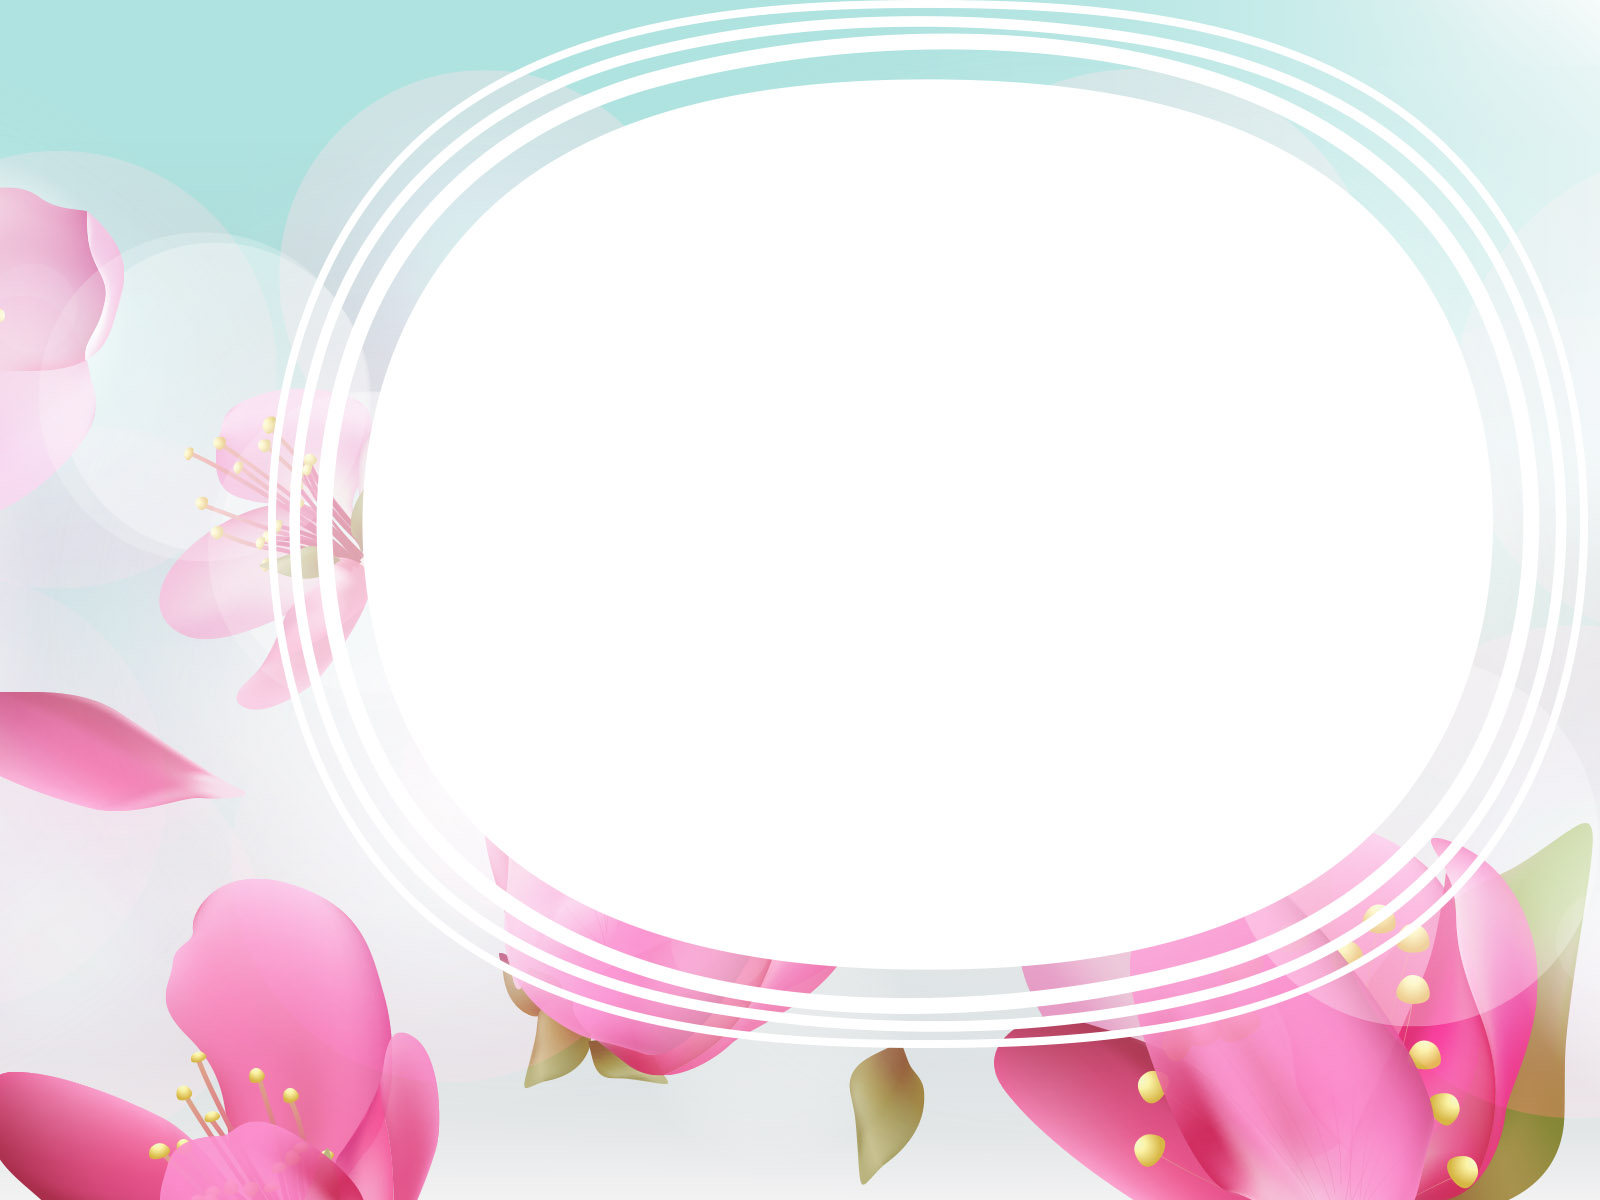 spring-flower-on-green-powerpoint-templates-flowers-free-ppt-backgrounds-and-templates